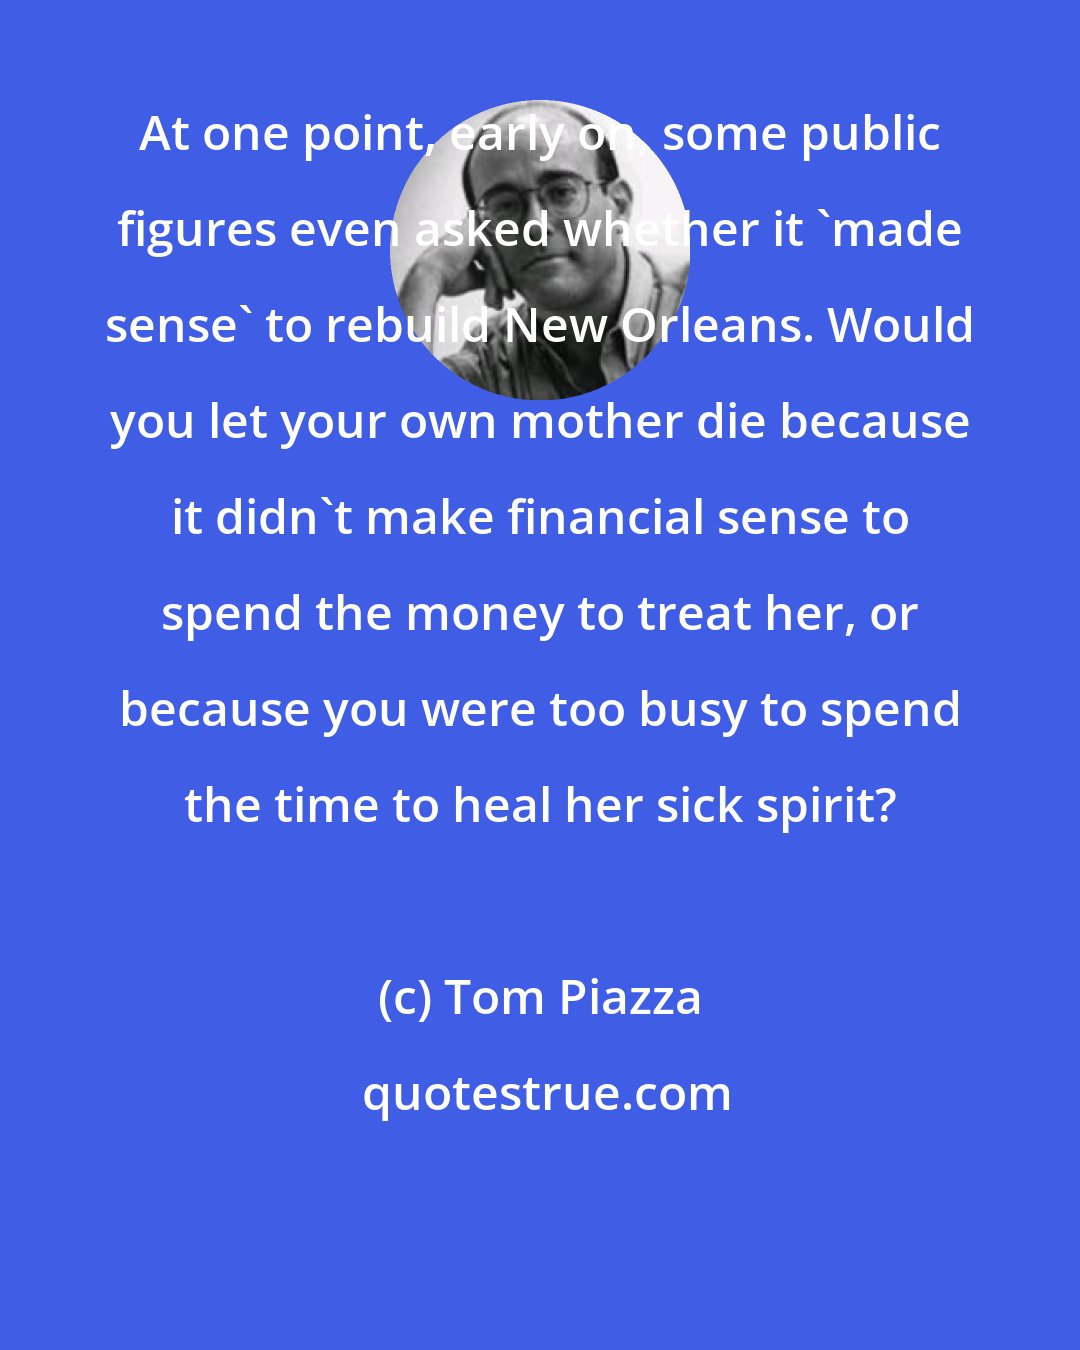 Tom Piazza: At one point, early on, some public figures even asked whether it 'made sense' to rebuild New Orleans. Would you let your own mother die because it didn't make financial sense to spend the money to treat her, or because you were too busy to spend the time to heal her sick spirit?